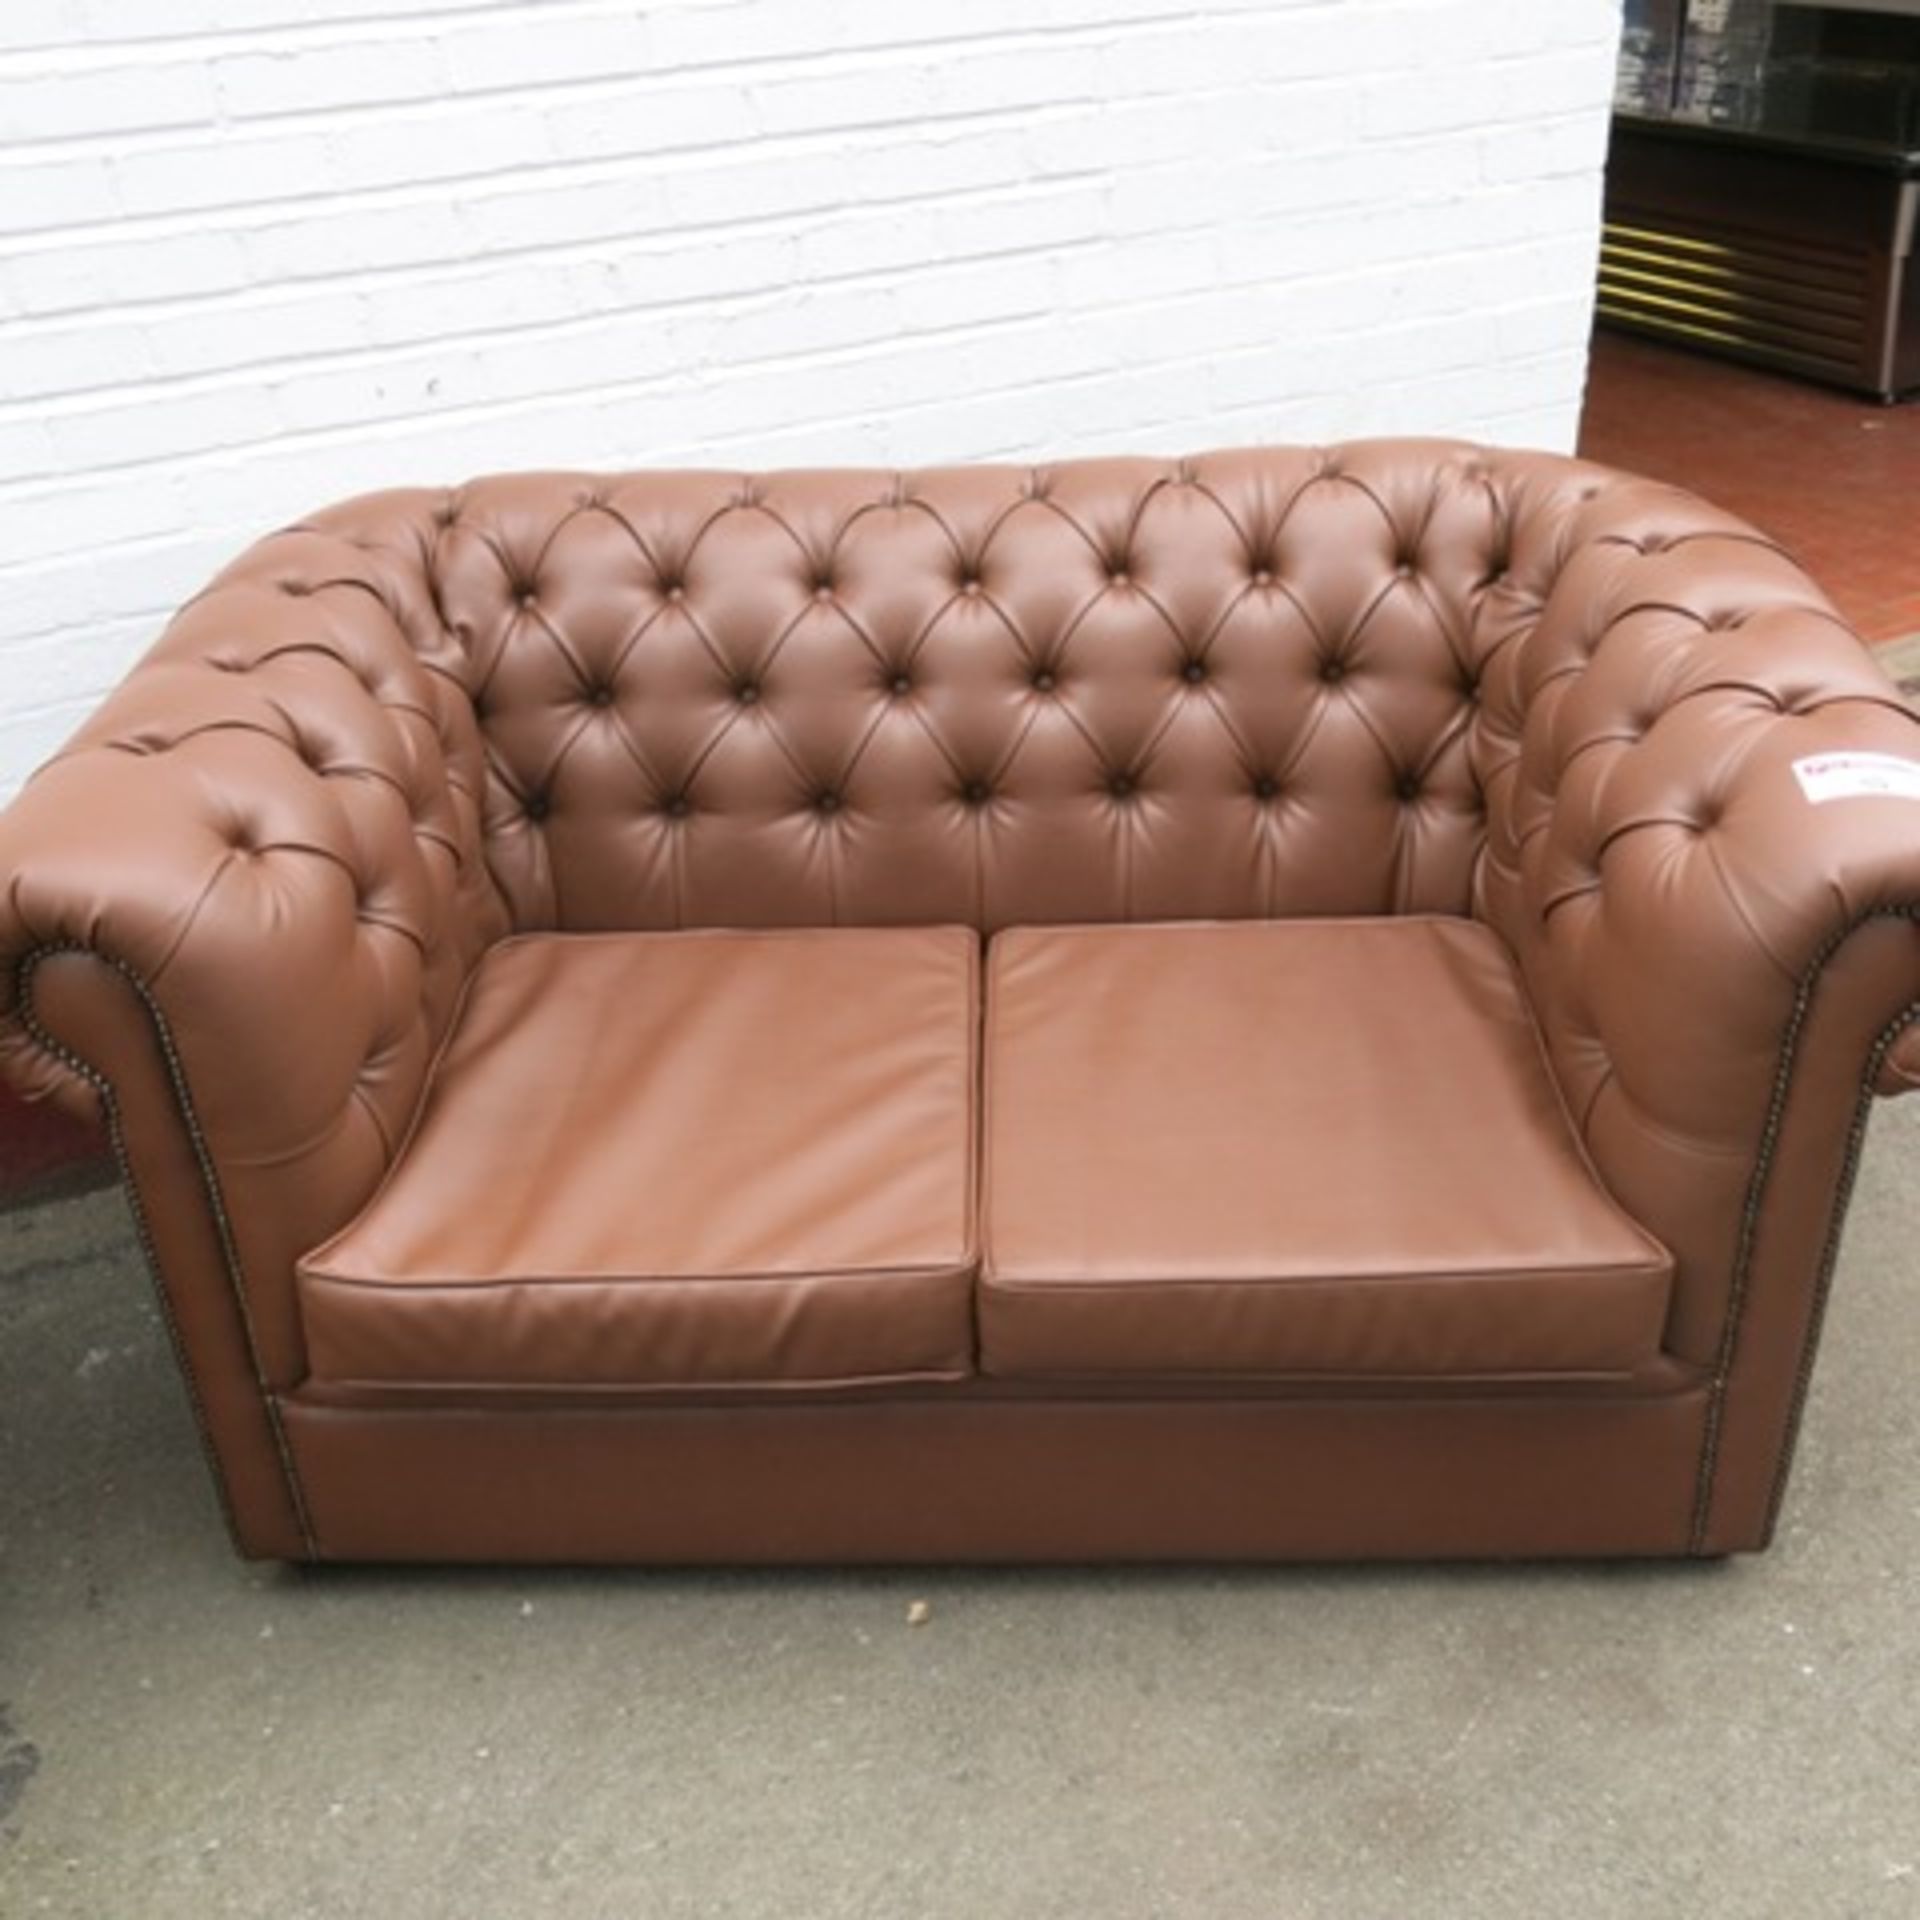 2 x Warings Furniture Chesterfield Style 2 Seater Sofas in Brown Faux Leather, Size (H)80cm x (D) - Image 3 of 6